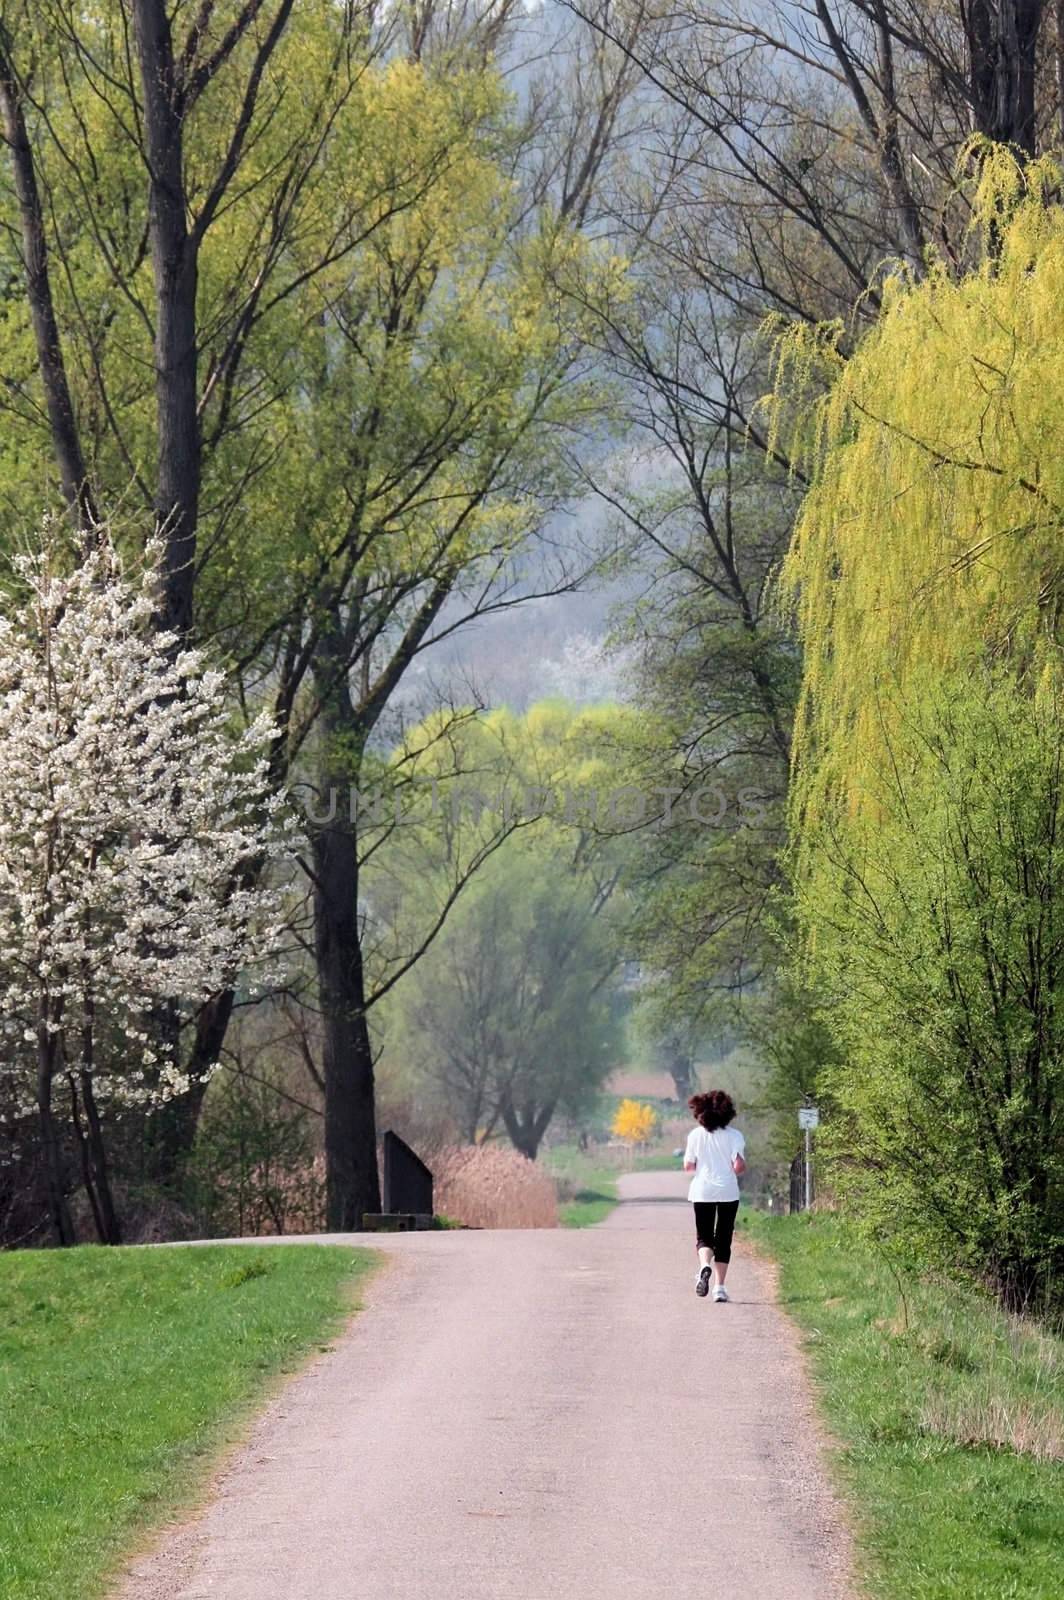 This image shows a jogging woman in a park 